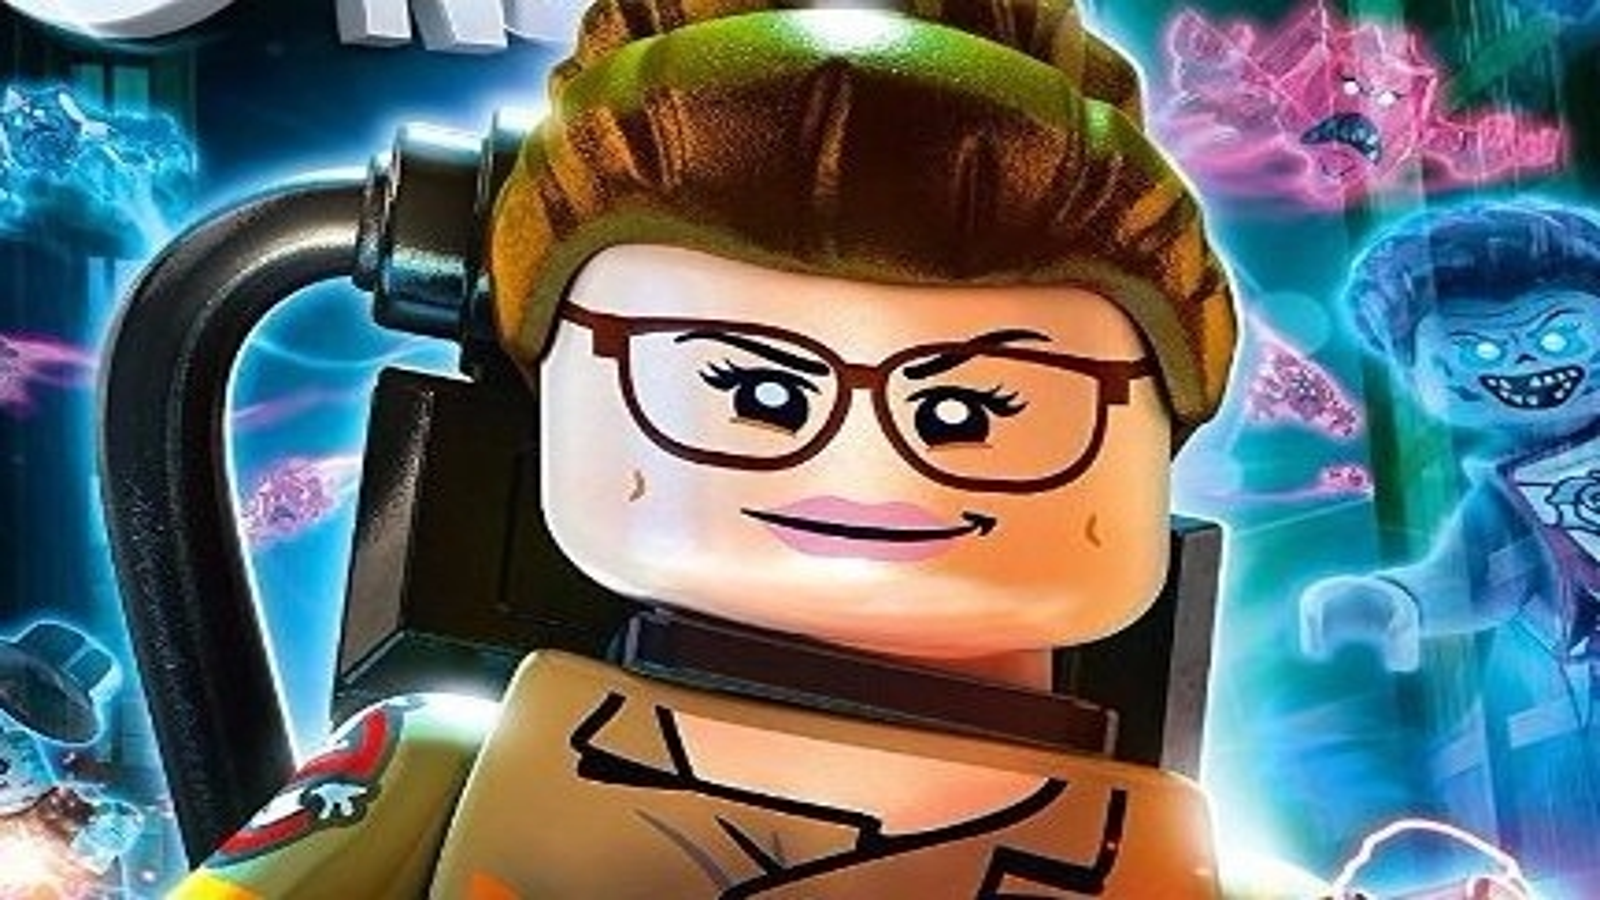 LEGO Dimensions: Story Pack - New Ghostbusters 